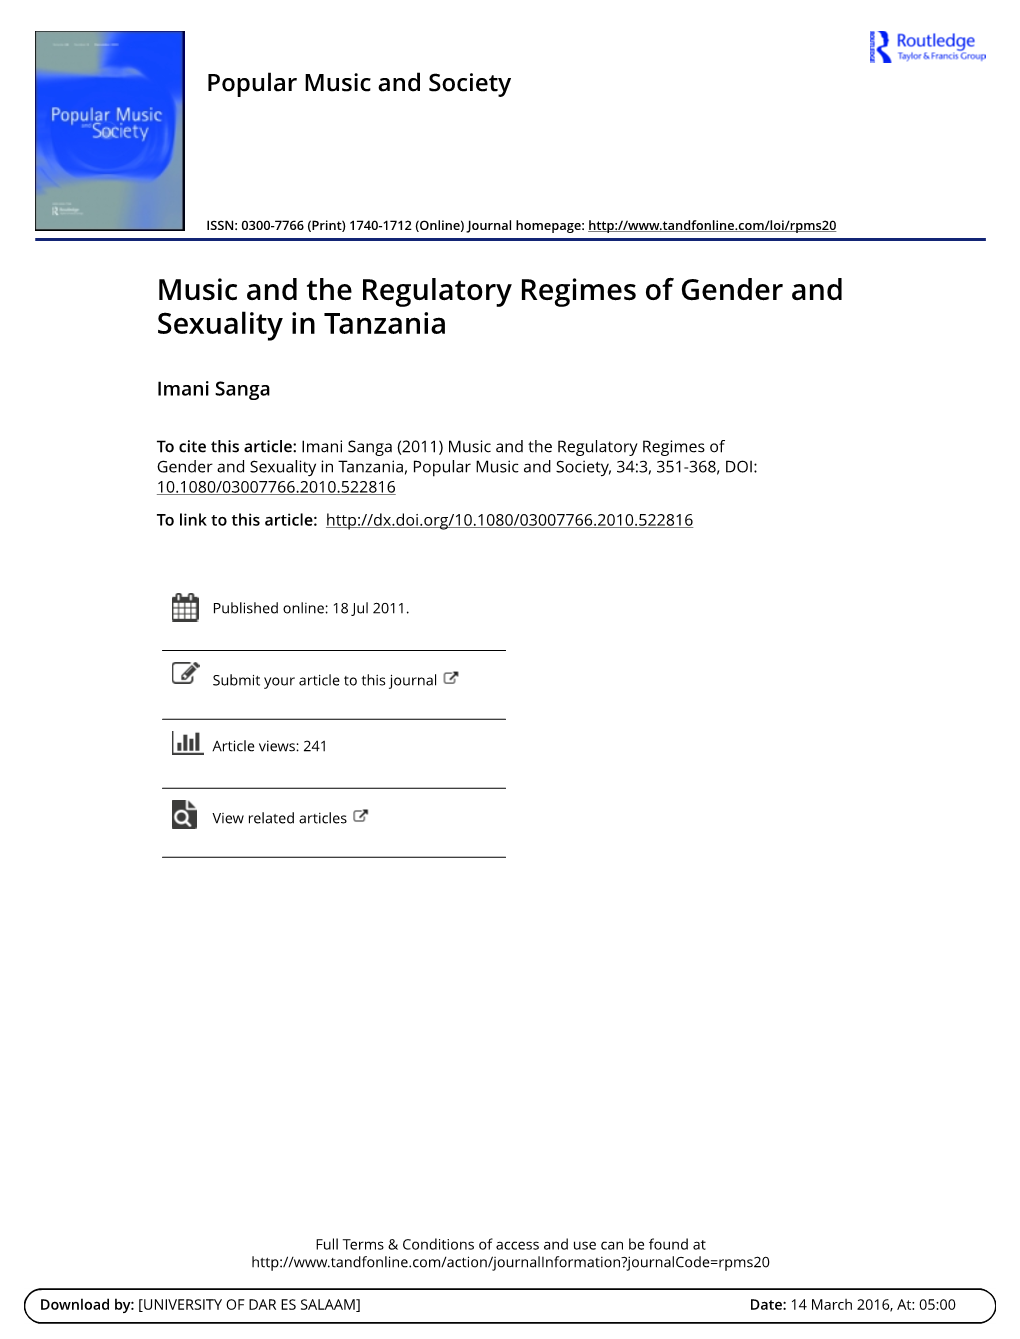 Music and the Regulatory Regimes of Gender and Sexuality in Tanzania